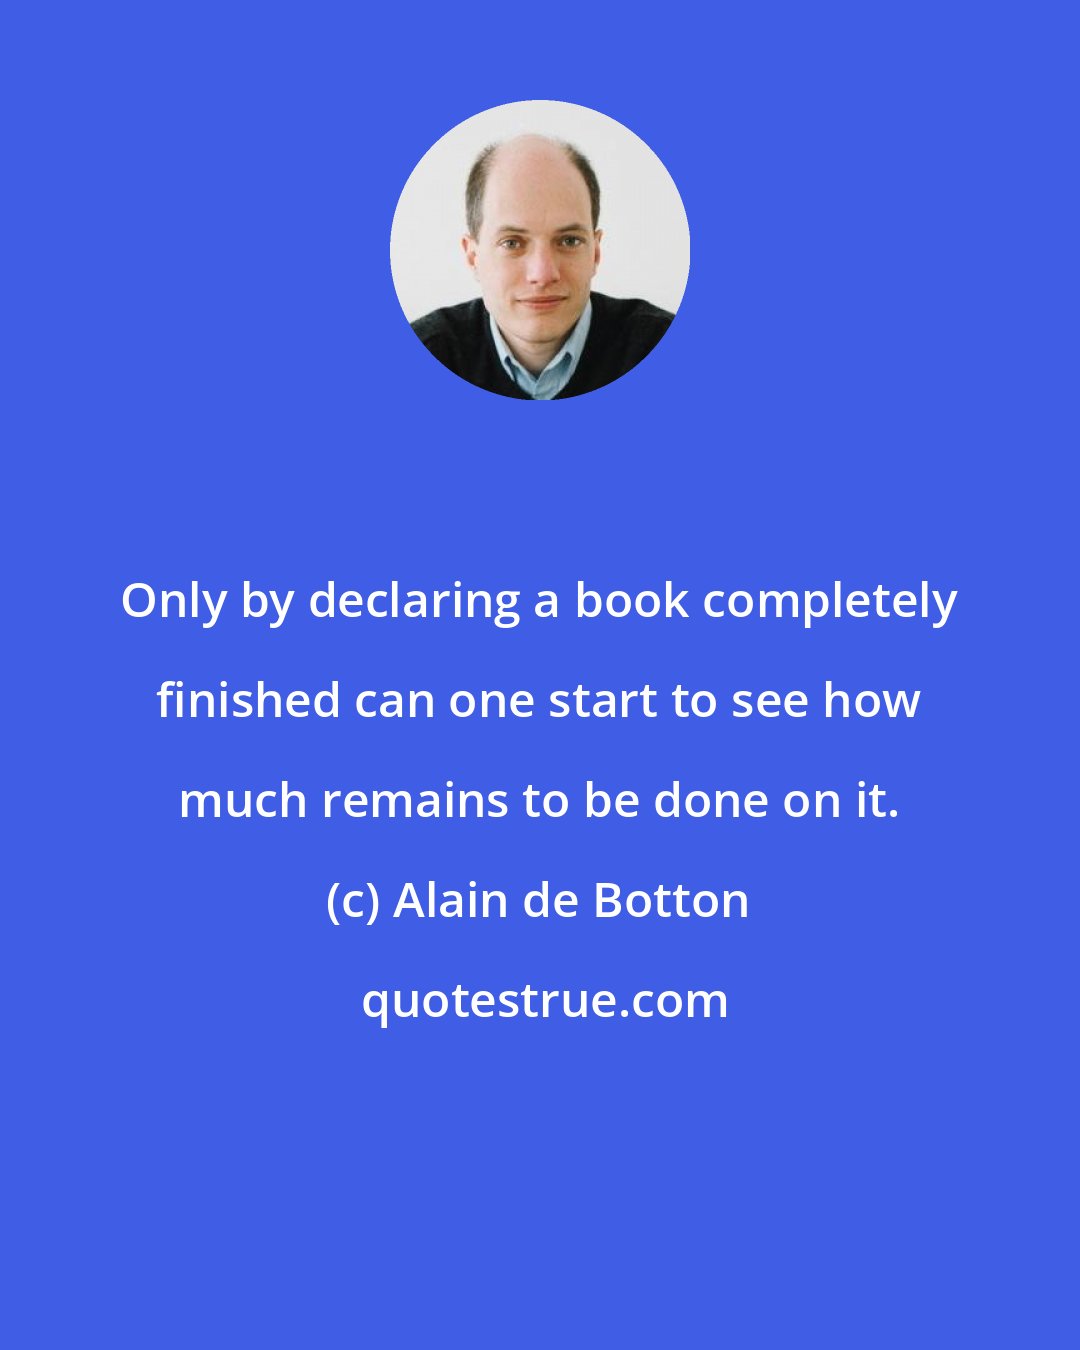 Alain de Botton: Only by declaring a book completely finished can one start to see how much remains to be done on it.